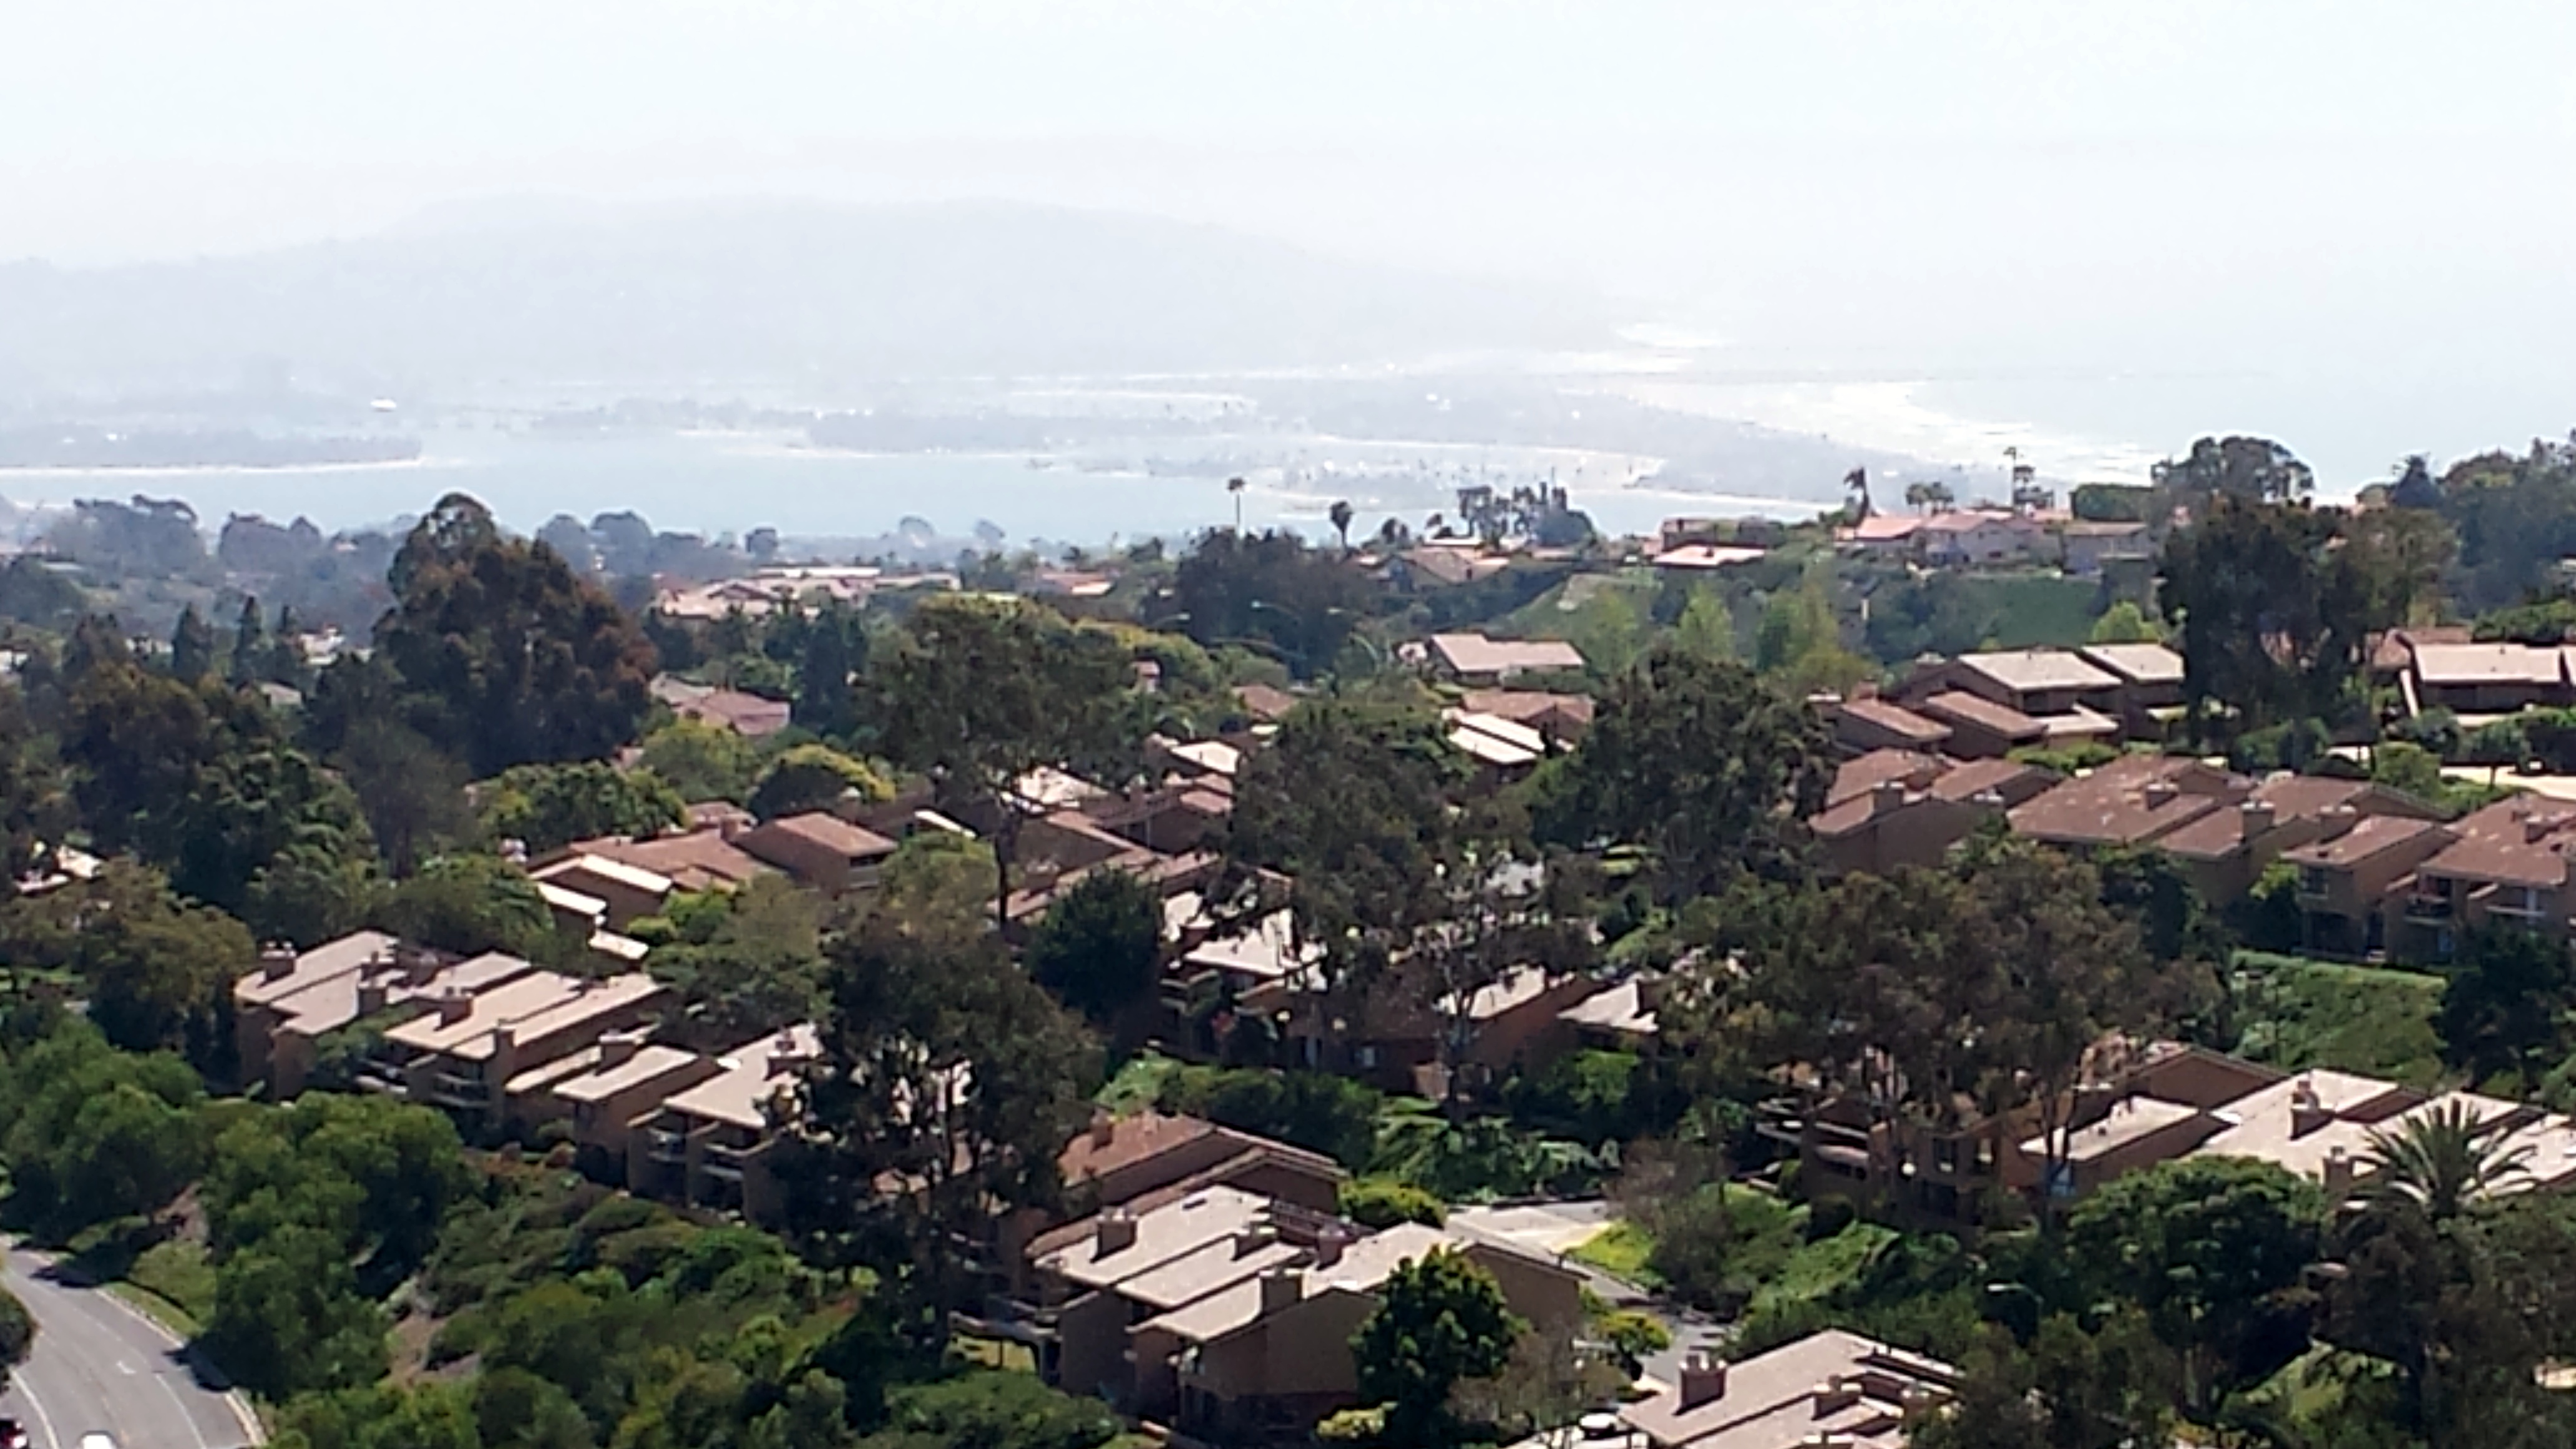 SD Mission Bay view 20160404_133511